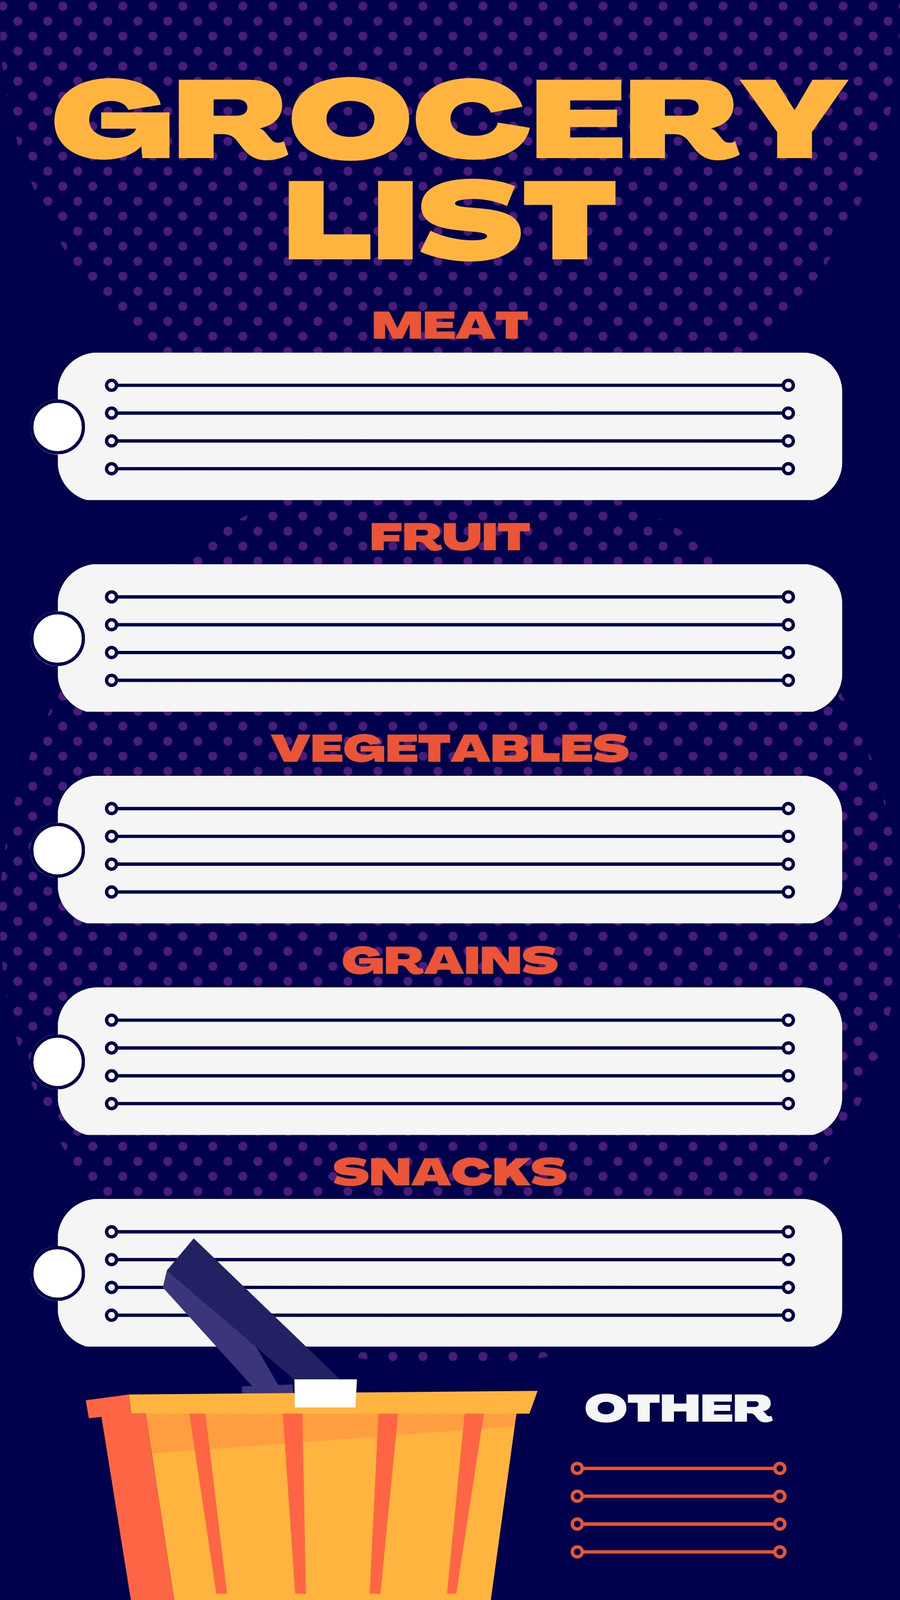 Free printable and customizable grocery list templates